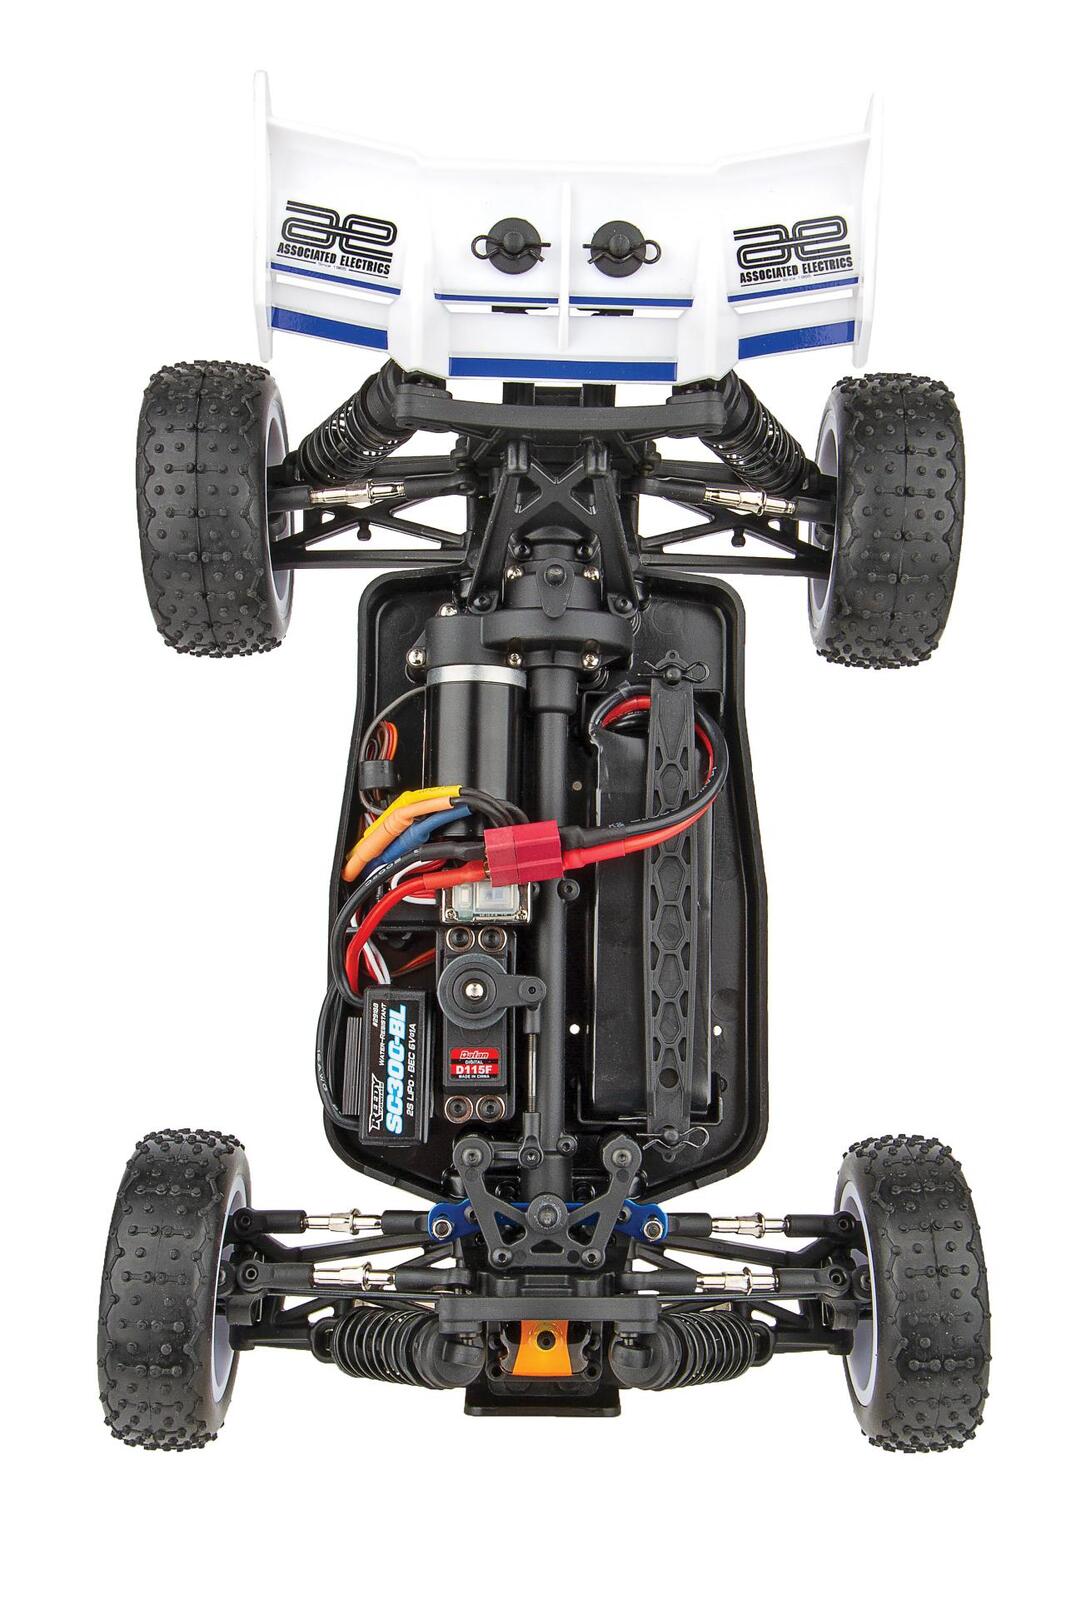 Reflex 14B Ongaro RTR (Requires battery & charger) - [Sunshine-Coast] - Team Associated - [RC-Car] - [Scale-Model]